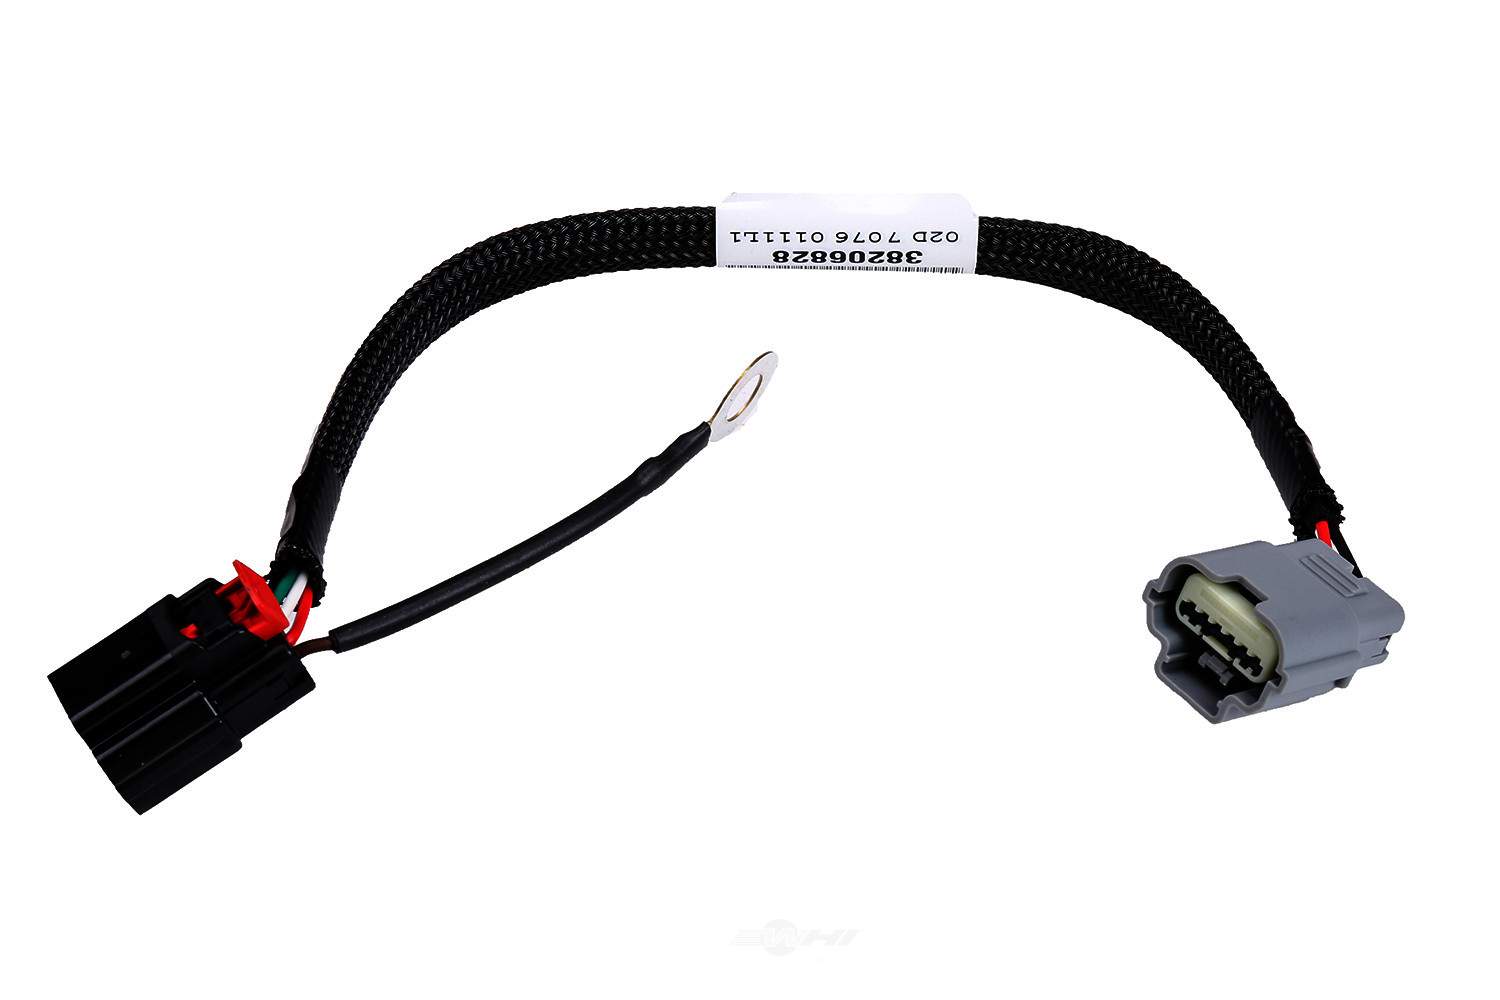 GM GENUINE PARTS - Power Steering Variable Assist Control Module Wiring Harness - GMP 23365214